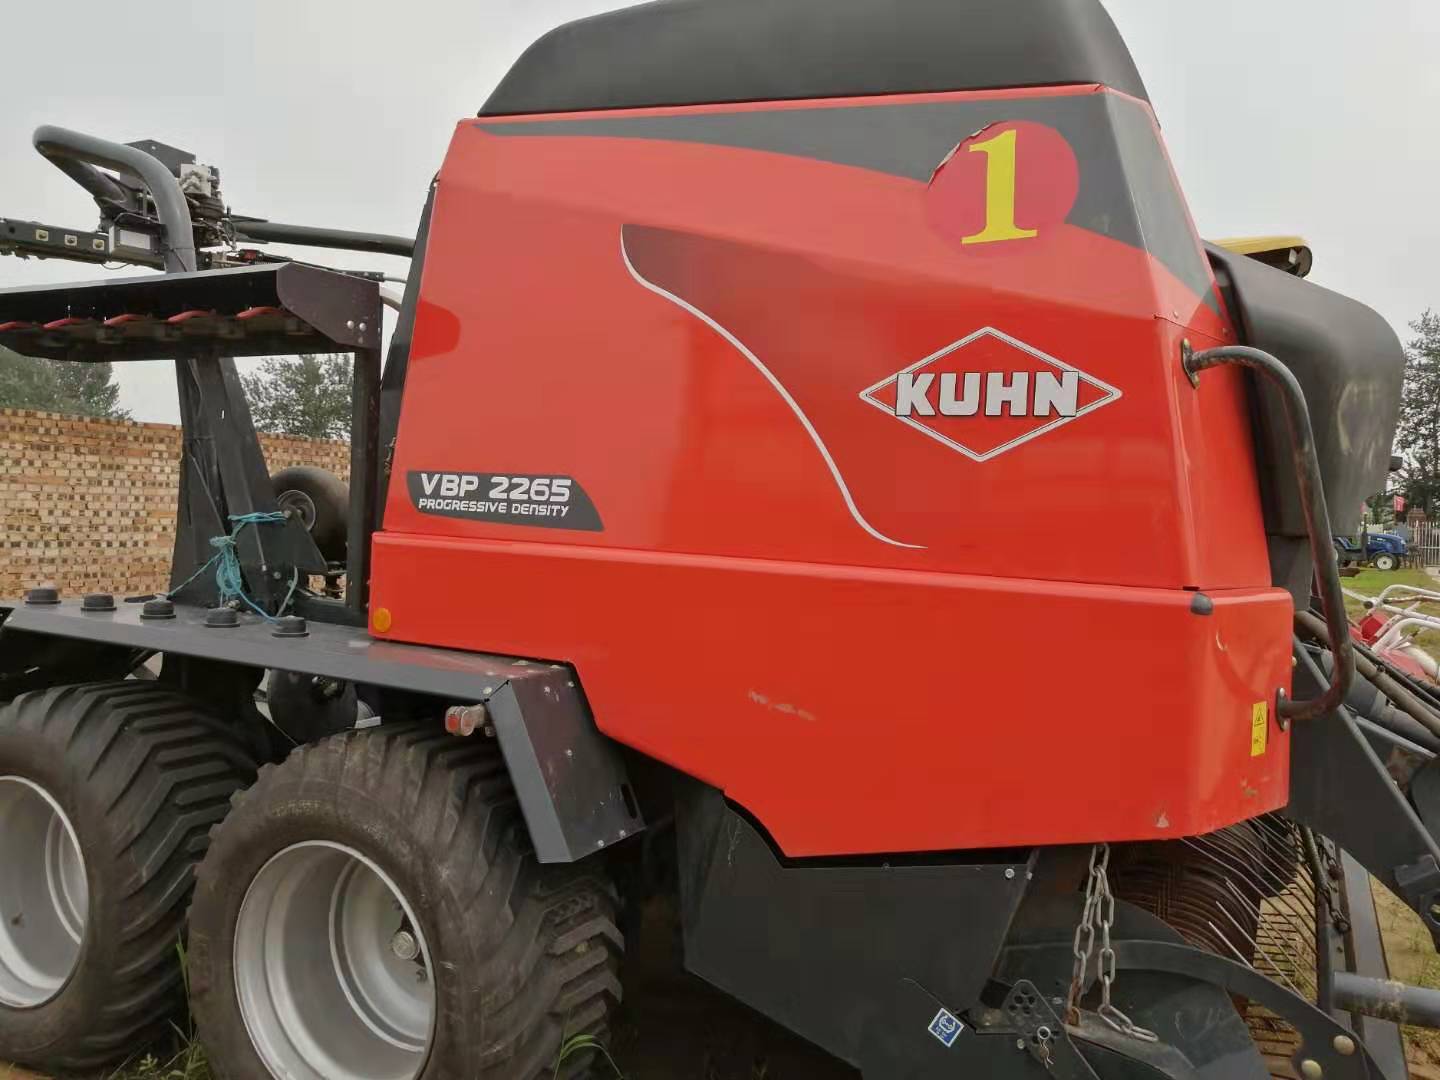 2018 Year almost New machine of Kuhn VBP 2265 baler and wrapping for sale(图2)